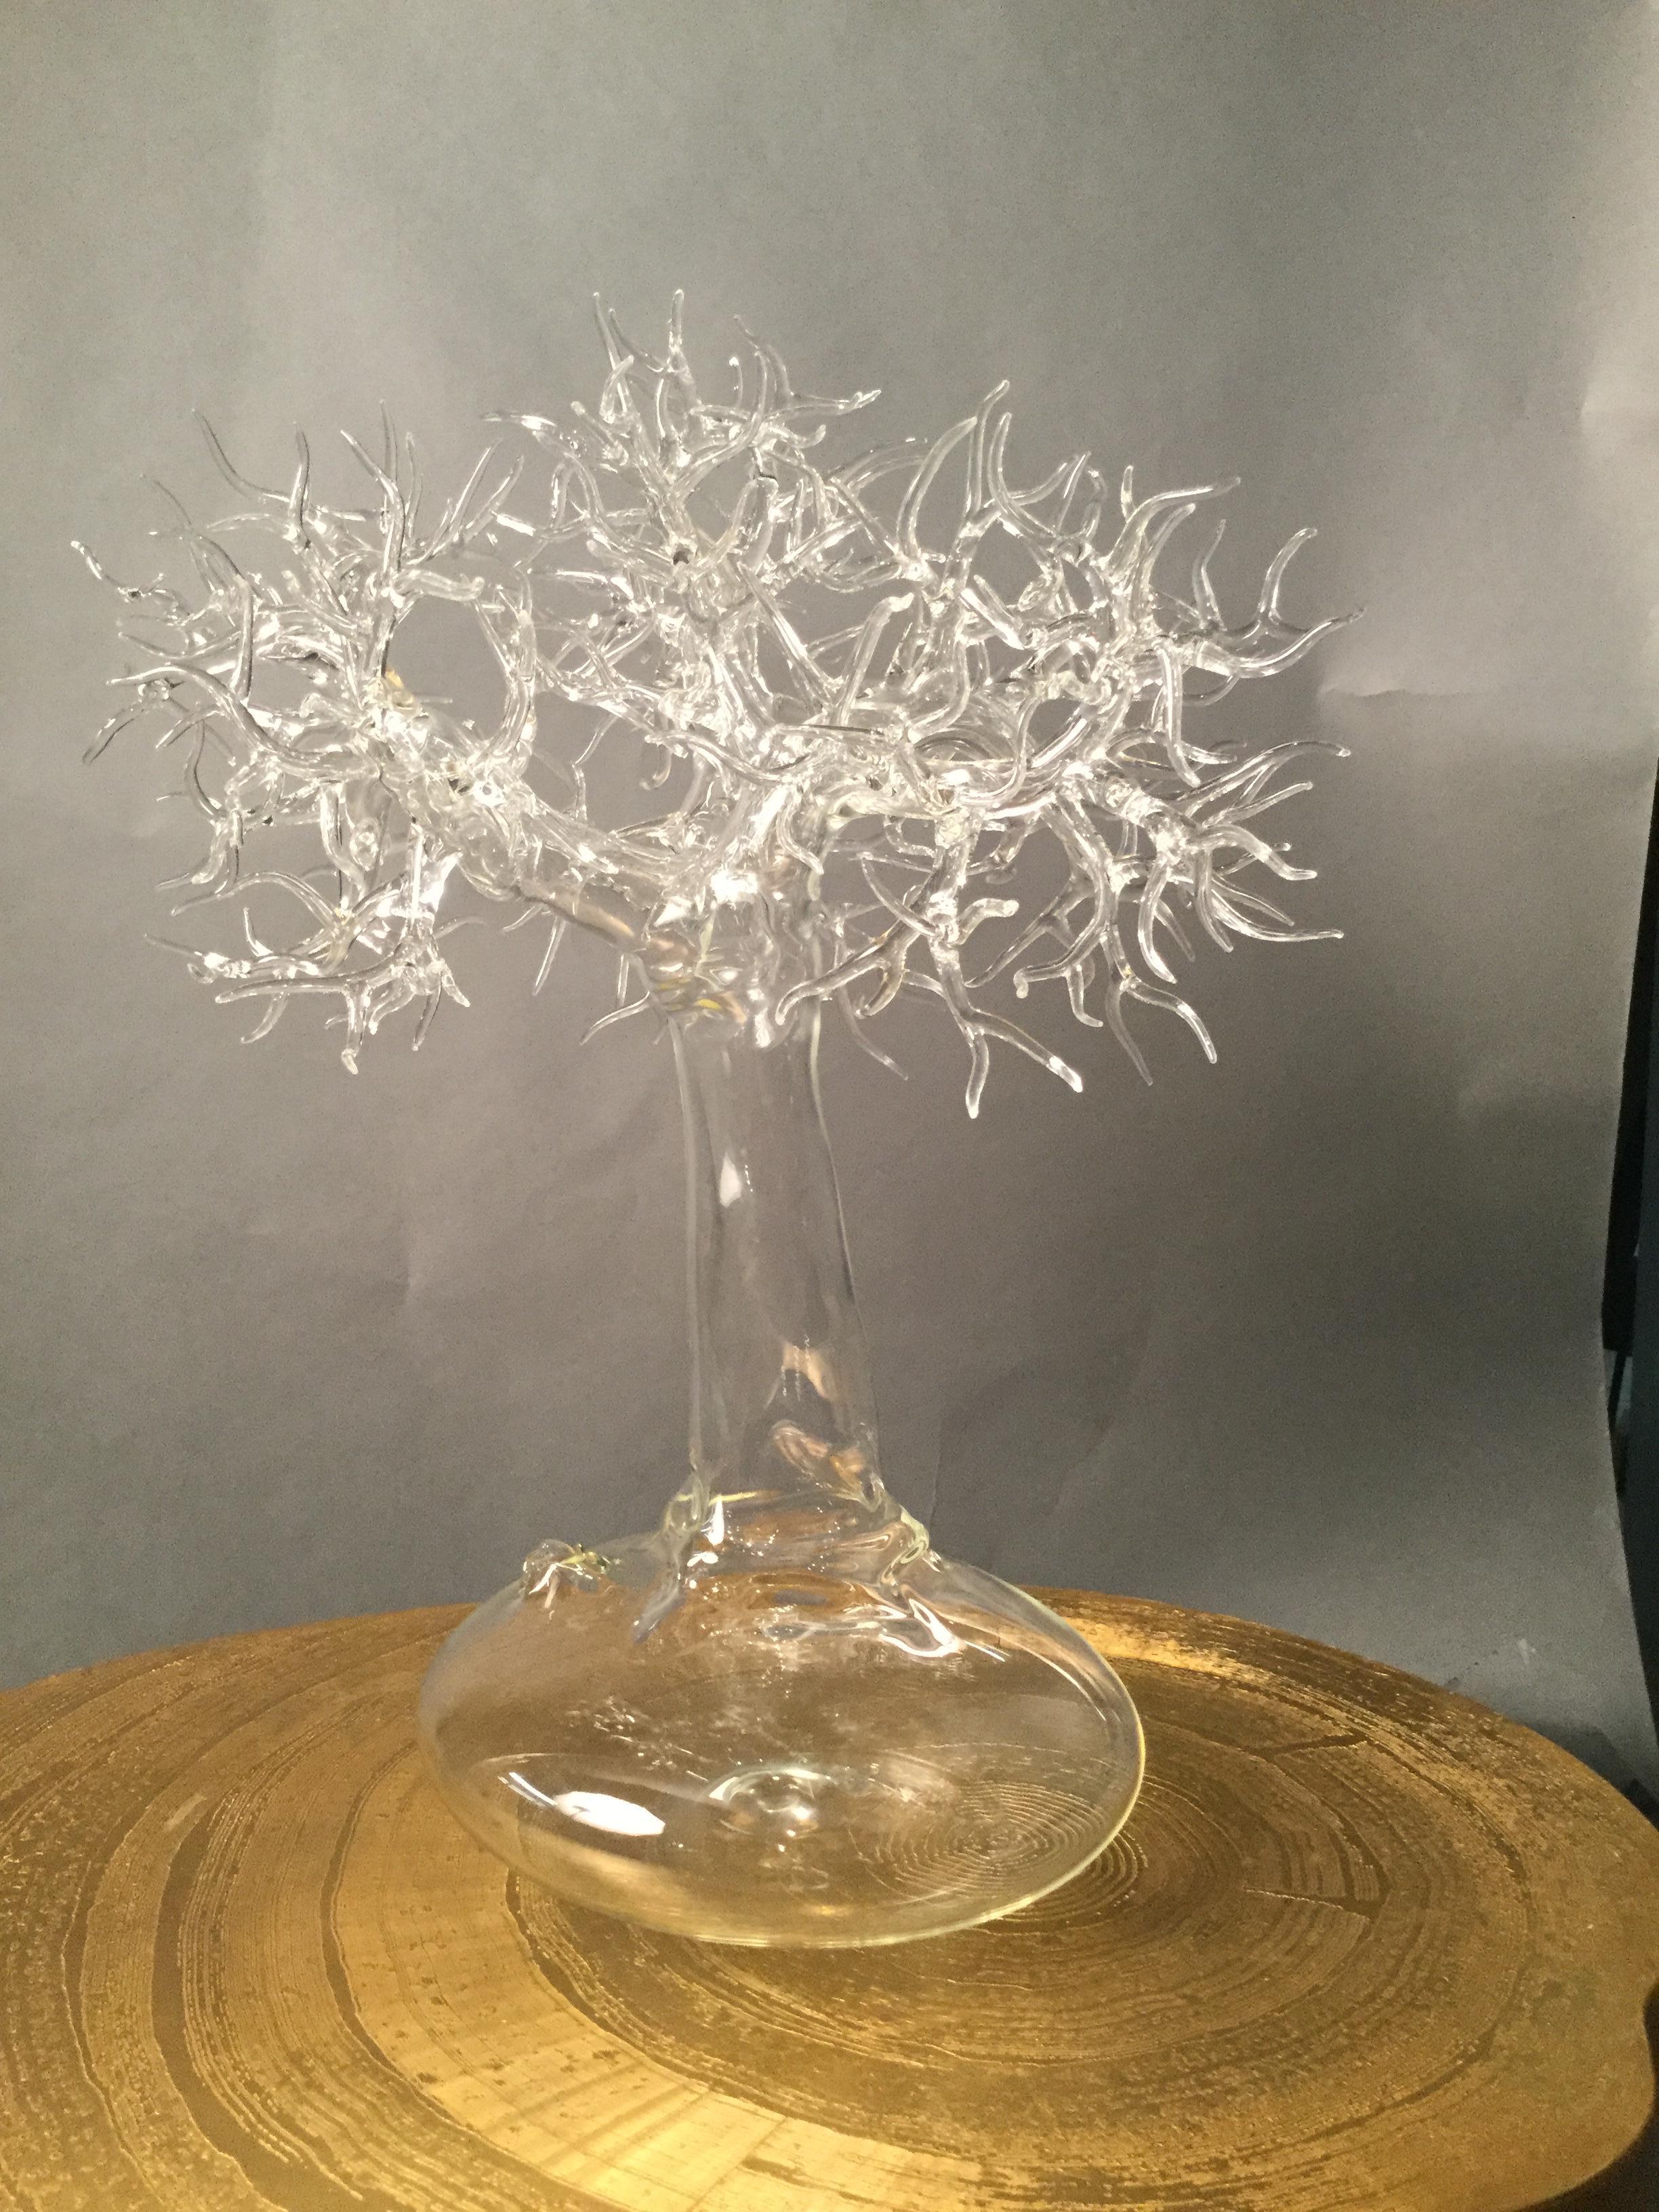 Fire-worked borosilicate glass in the form of a miniature tree set atop a bulbous base. Signed and dated on the trunk: Simone Crestani 2017.